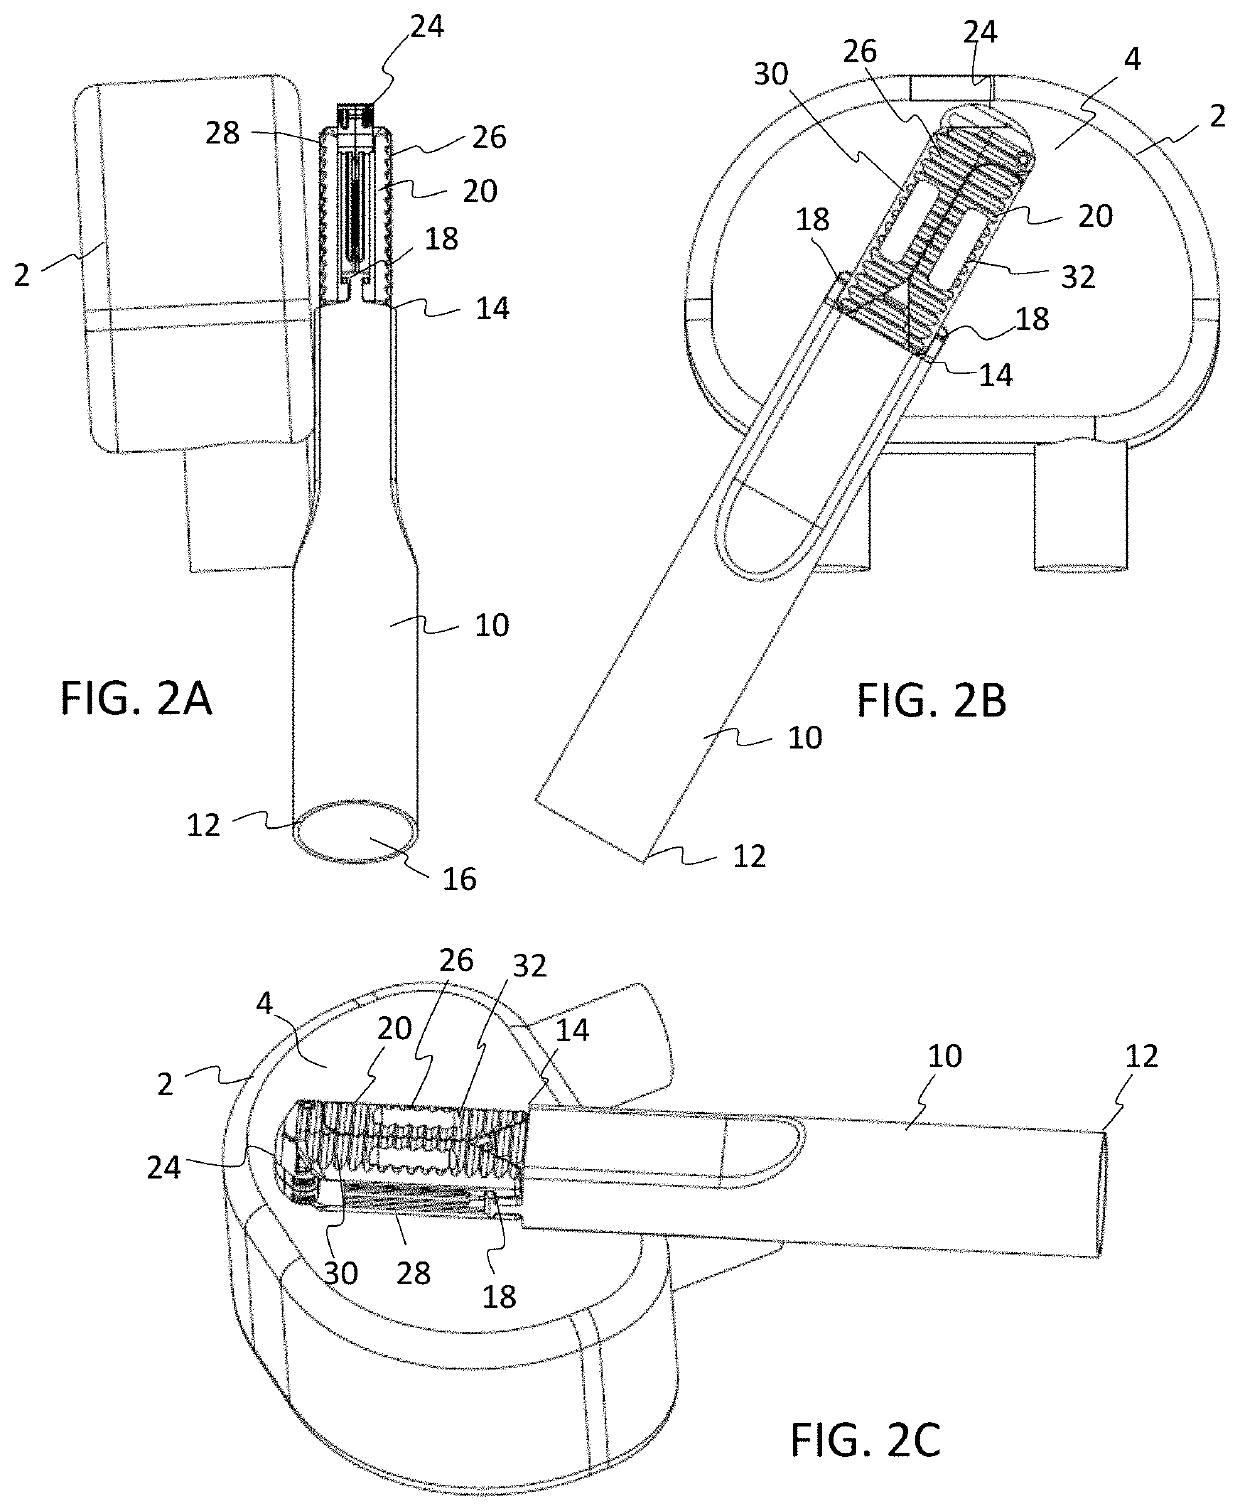 Expandable interbody fusions devices